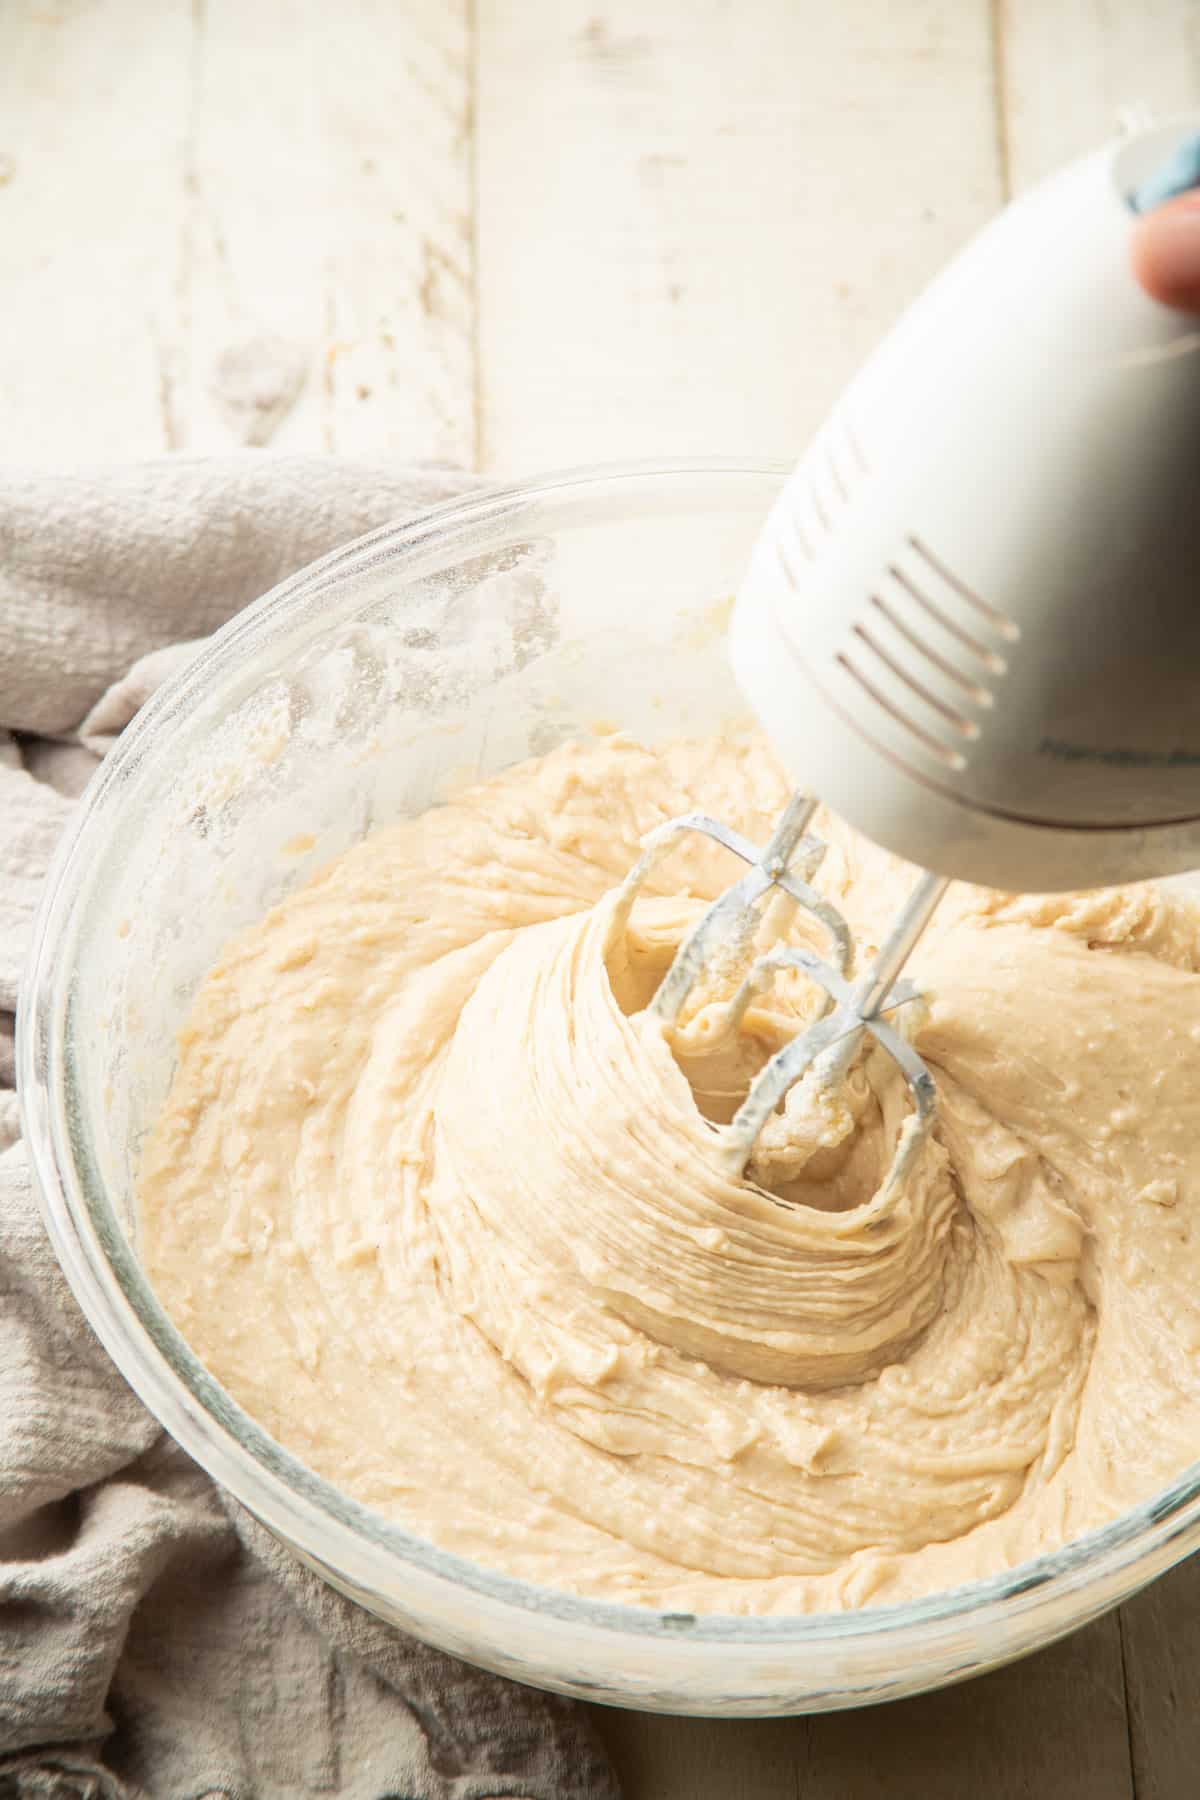 Electric mixer beating cake batter in a mixing bowl.